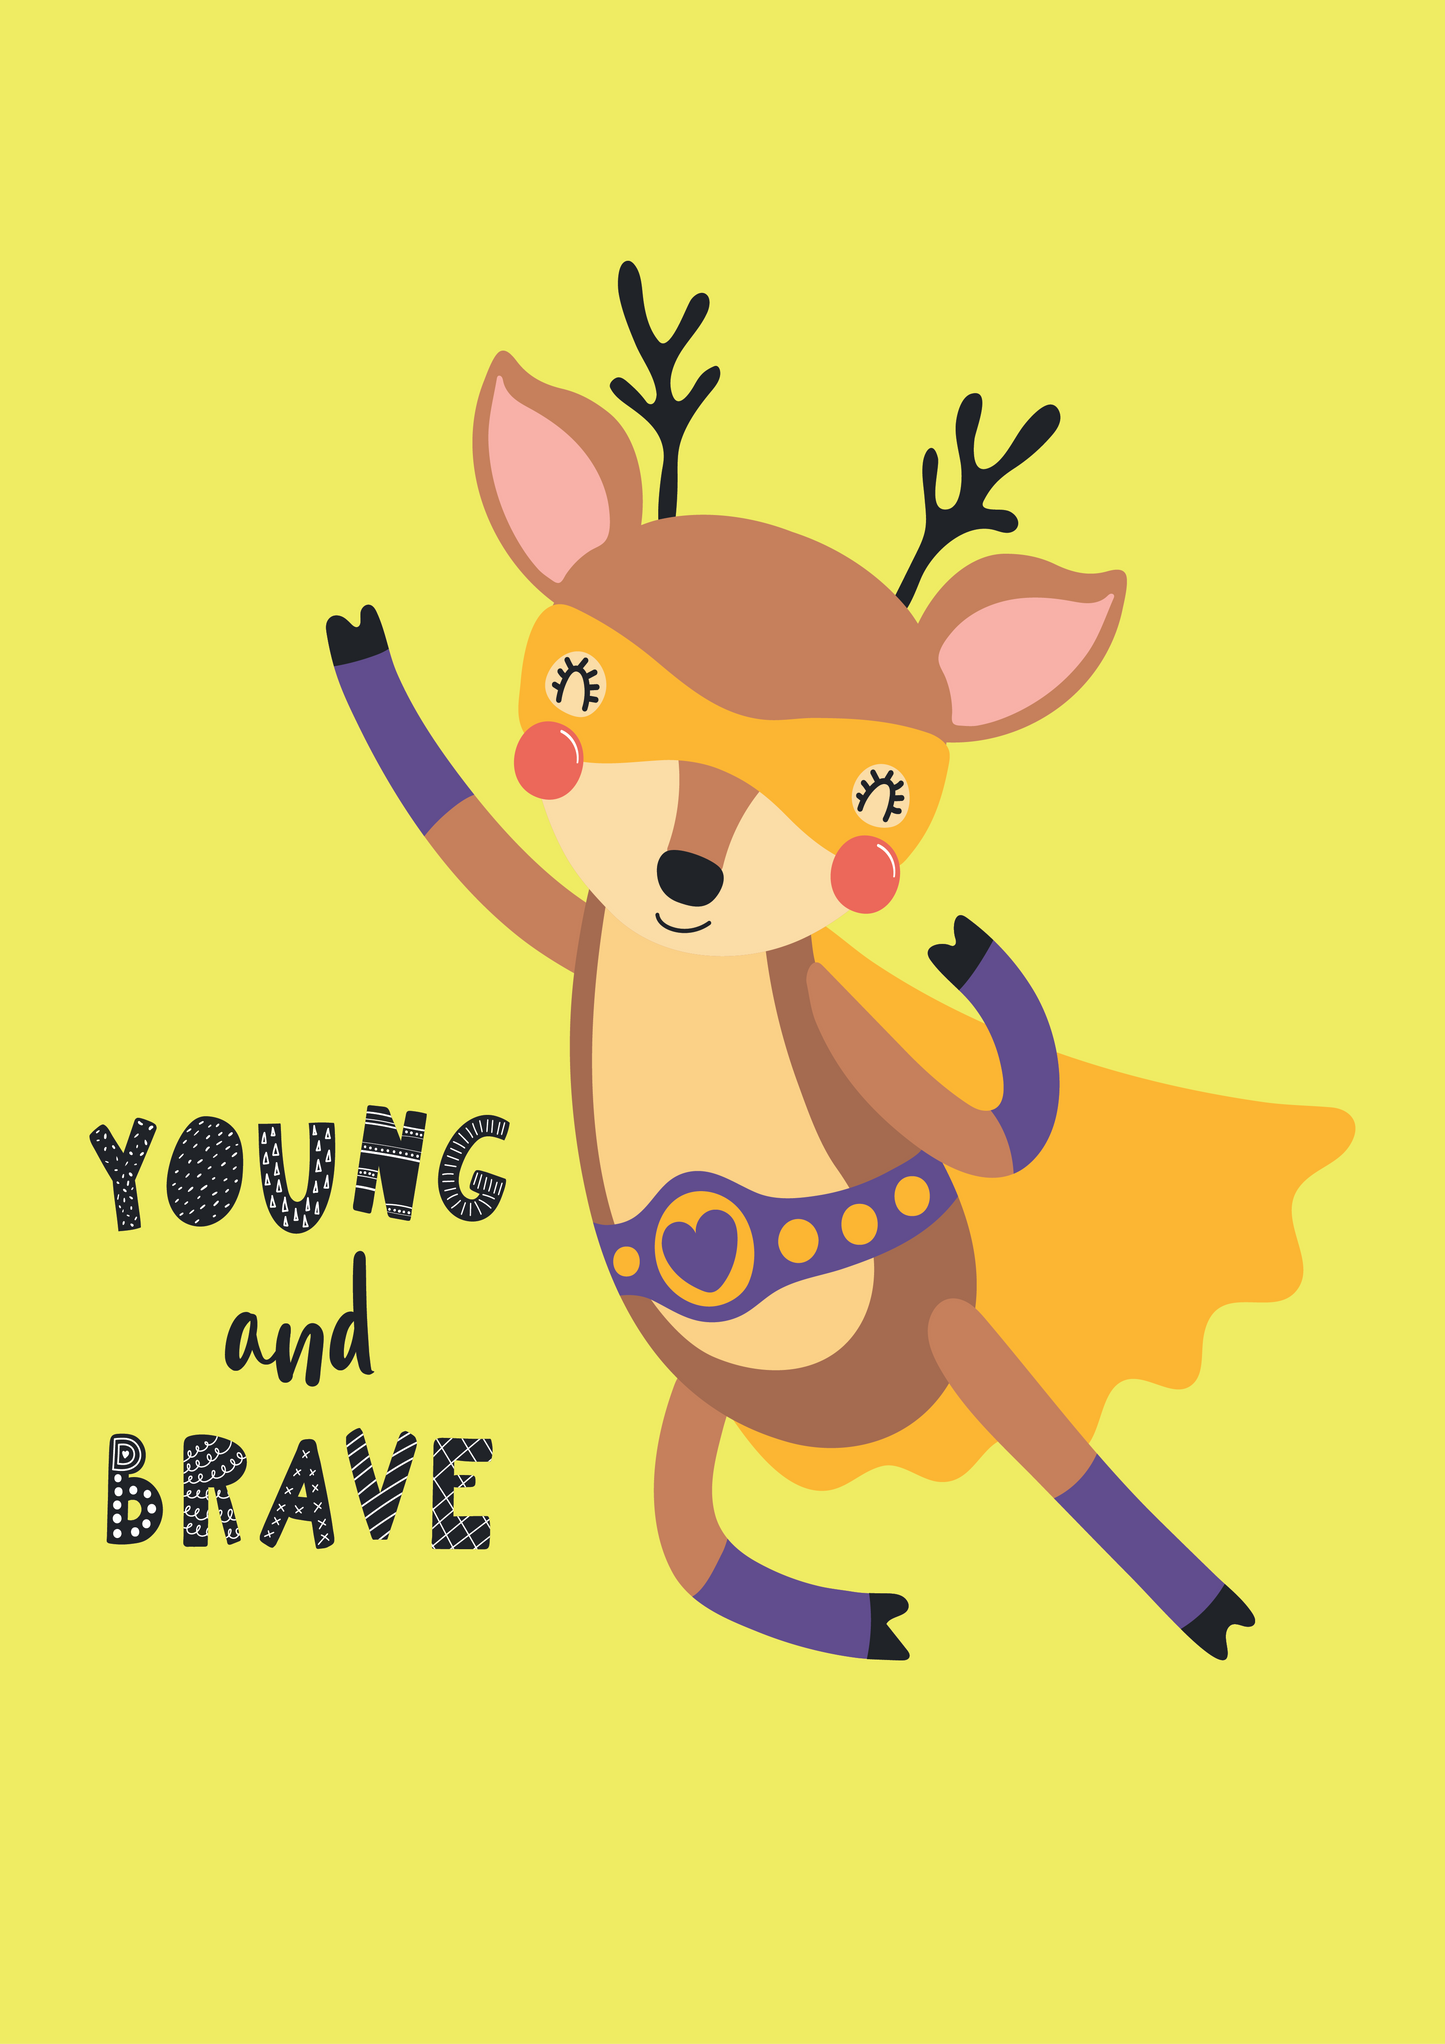 Young and Brave